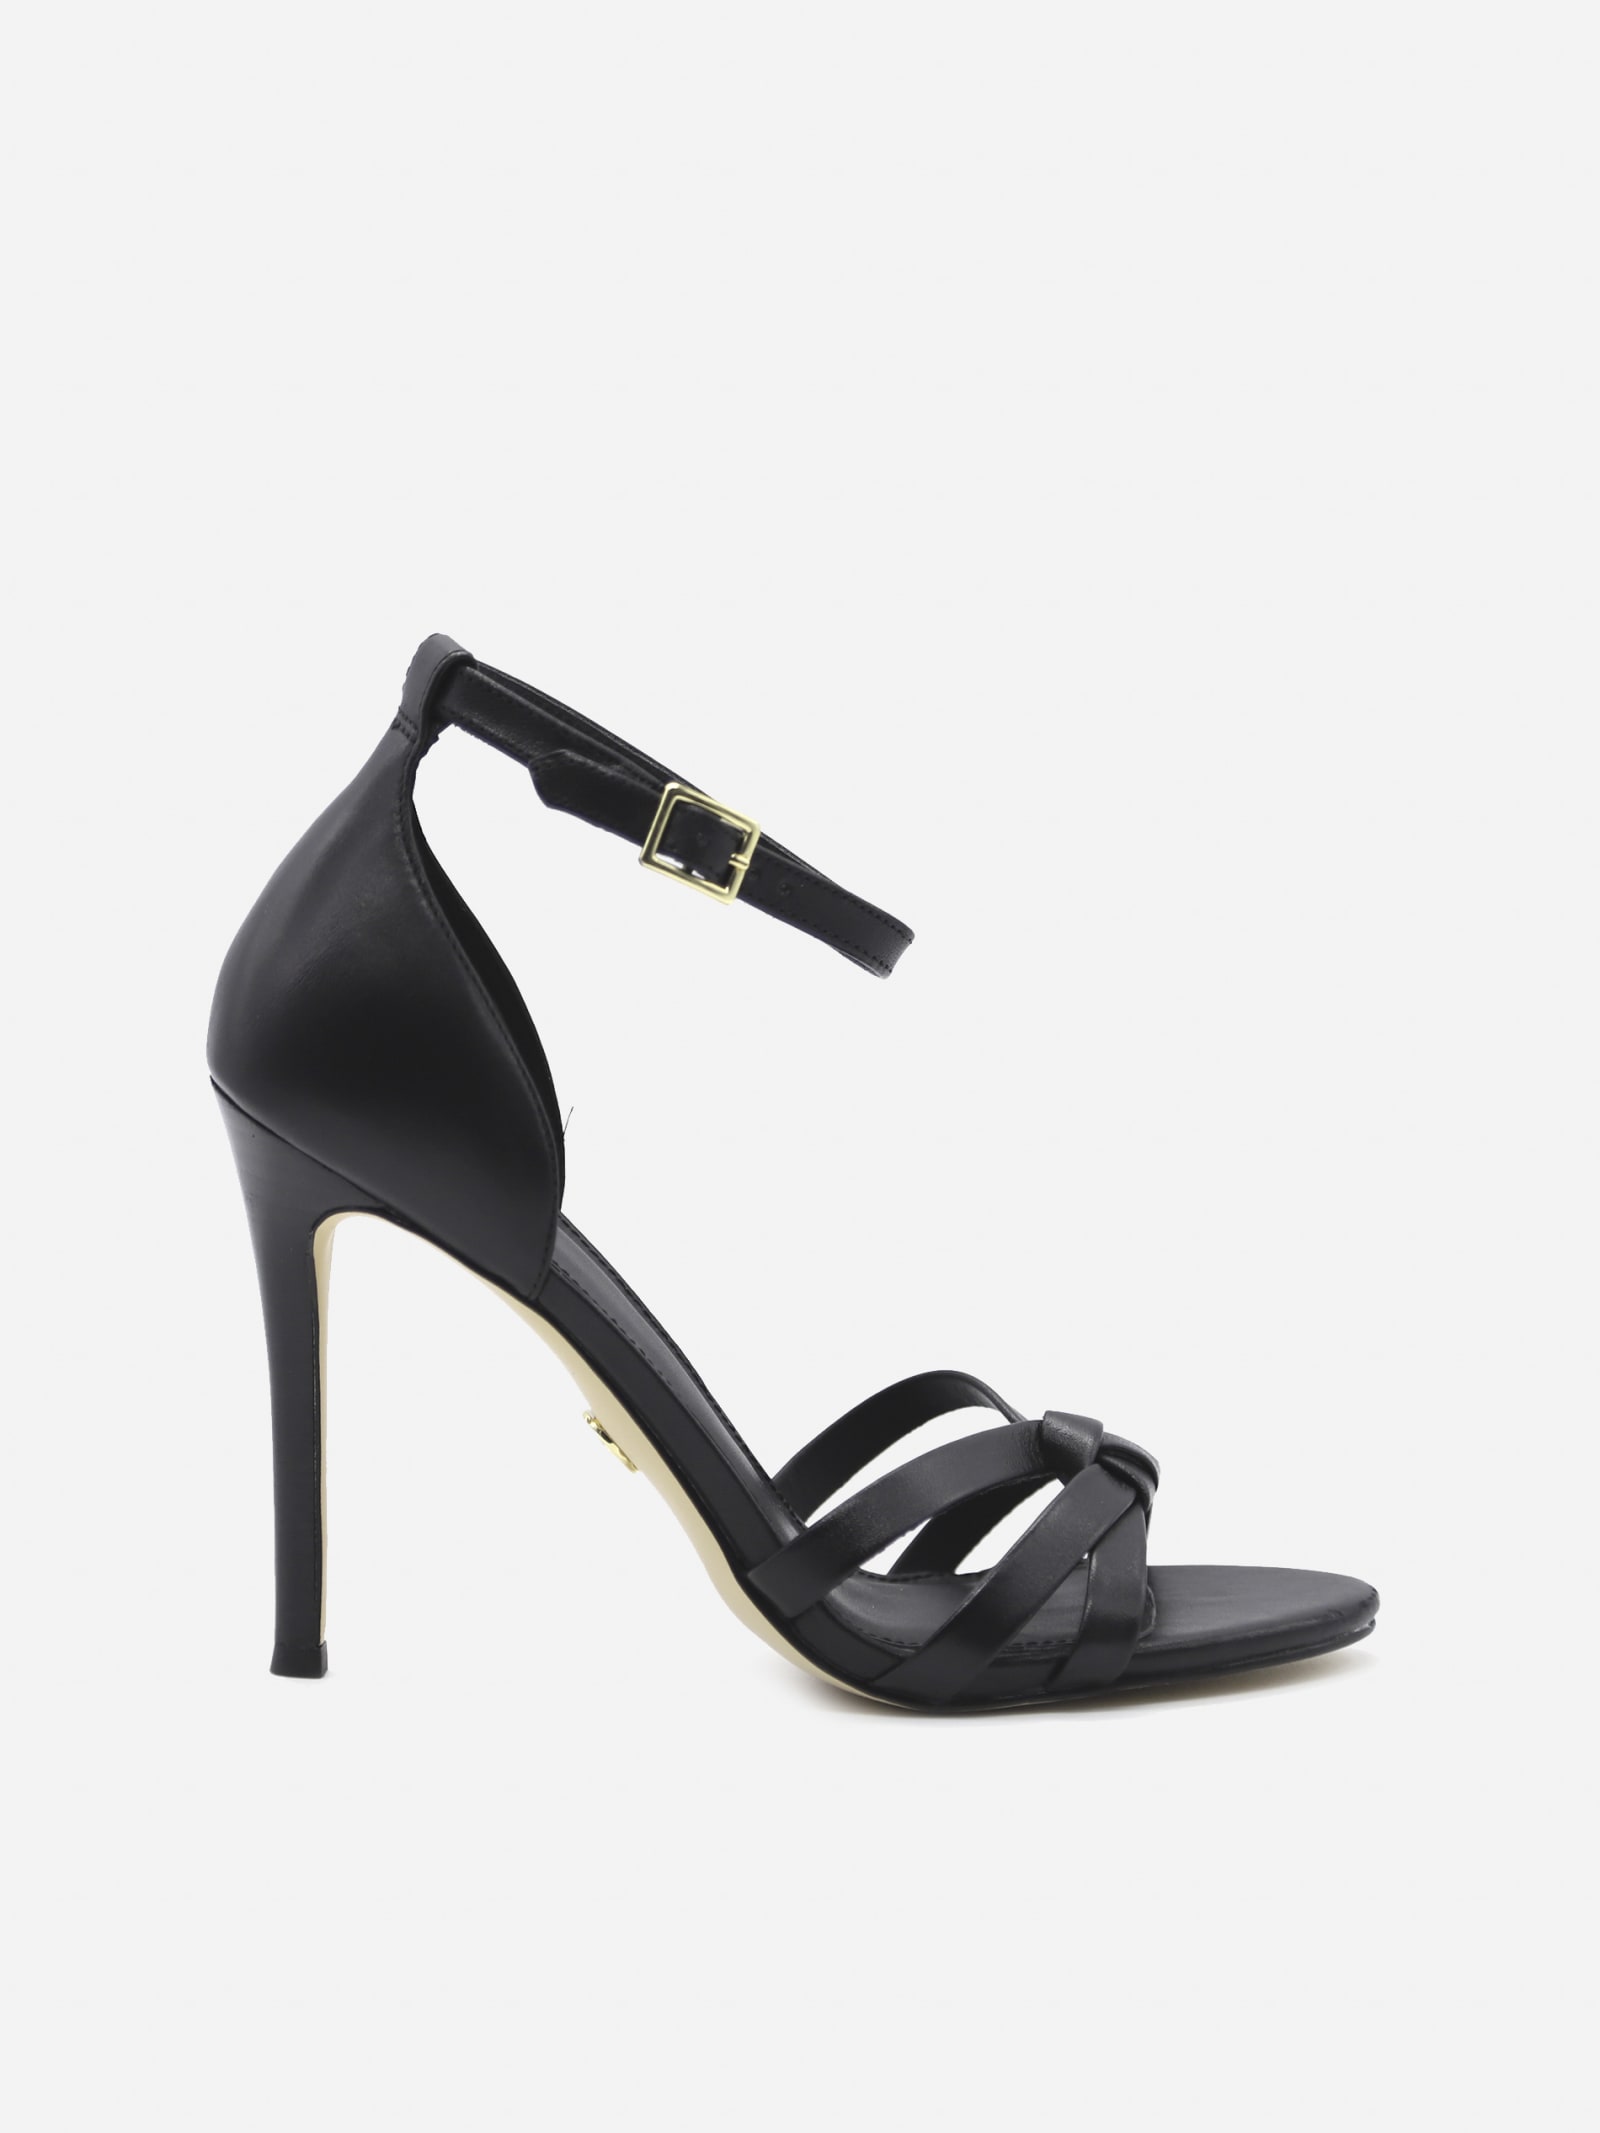 Buy MICHAEL Michael Kors Brinkley Leather Sandals online, shop MICHAEL Michael Kors shoes with free shipping